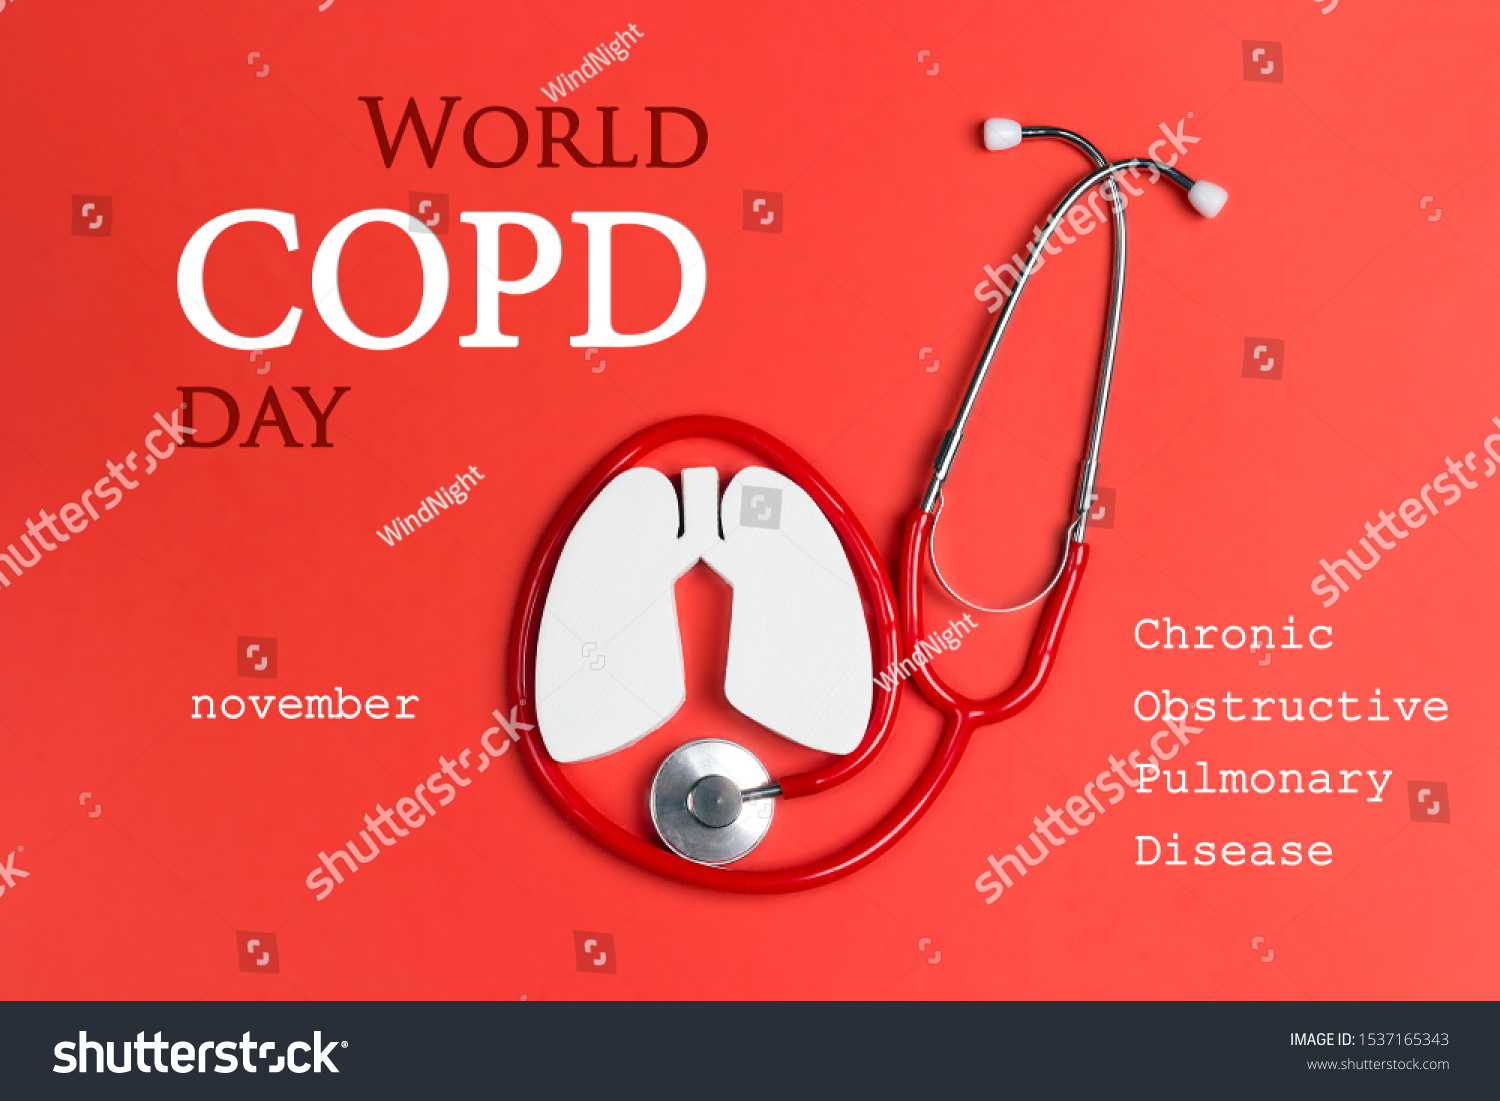 World COPD day concept with lung symbol and stethoscope on a red background. Banner for medical campaign against chronic obstructive pulmonary disease in november. #1537165343